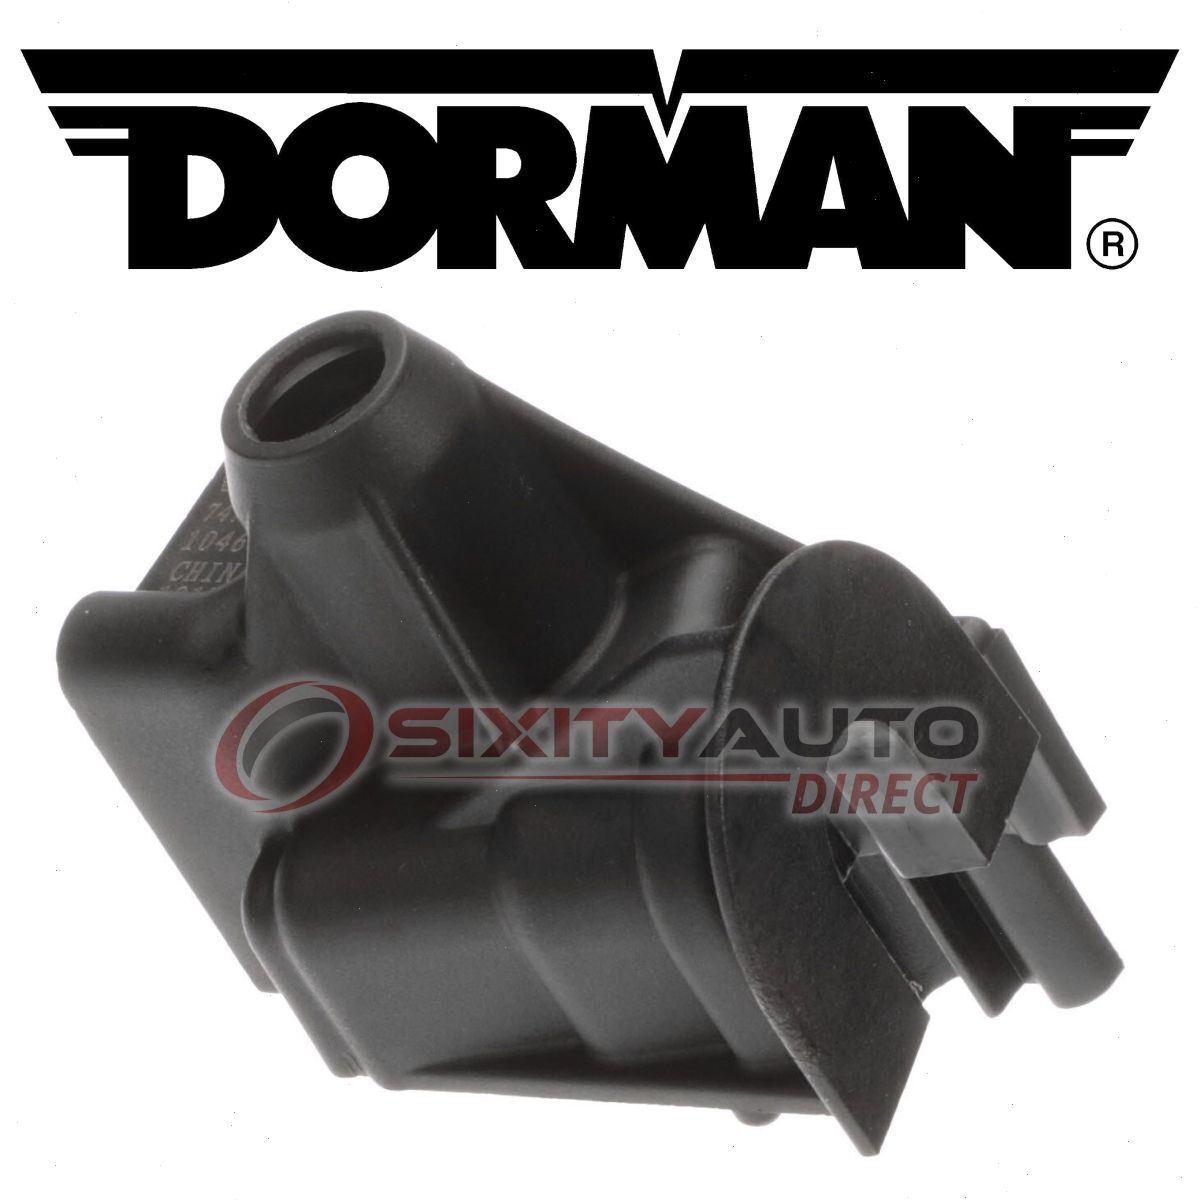 Dorman 747-001 Trunk Release Motor Housing for 20160581 Electrical Lighting wy